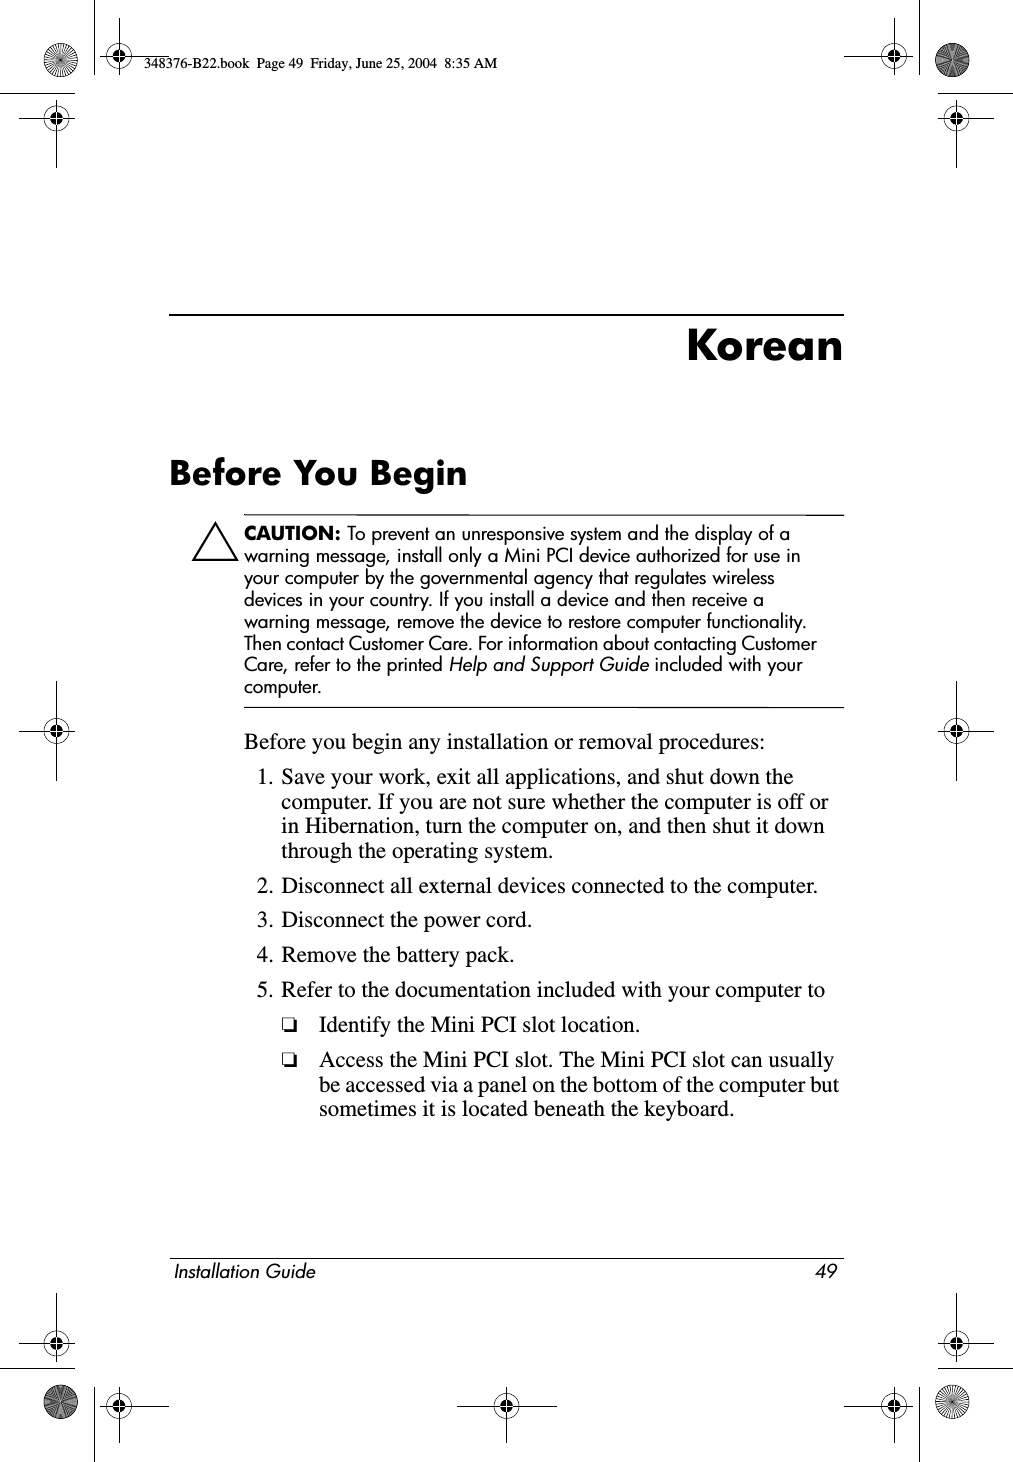 Installation Guide 49KoreanBefore You BeginÄCAUTION: To prevent an unresponsive system and the display of a warning message, install only a Mini PCI device authorized for use in your computer by the governmental agency that regulates wireless devices in your country. If you install a device and then receive a warning message, remove the device to restore computer functionality. Then contact Customer Care. For information about contacting Customer Care, refer to the printed Help and Support Guide included with your computer.Before you begin any installation or removal procedures:1. Save your work, exit all applications, and shut down the computer. If you are not sure whether the computer is off or in Hibernation, turn the computer on, and then shut it down through the operating system.2. Disconnect all external devices connected to the computer.3. Disconnect the power cord.4. Remove the battery pack.5. Refer to the documentation included with your computer to❏Identify the Mini PCI slot location.❏Access the Mini PCI slot. The Mini PCI slot can usually be accessed via a panel on the bottom of the computer but sometimes it is located beneath the keyboard.348376-B22.book  Page 49  Friday, June 25, 2004  8:35 AM